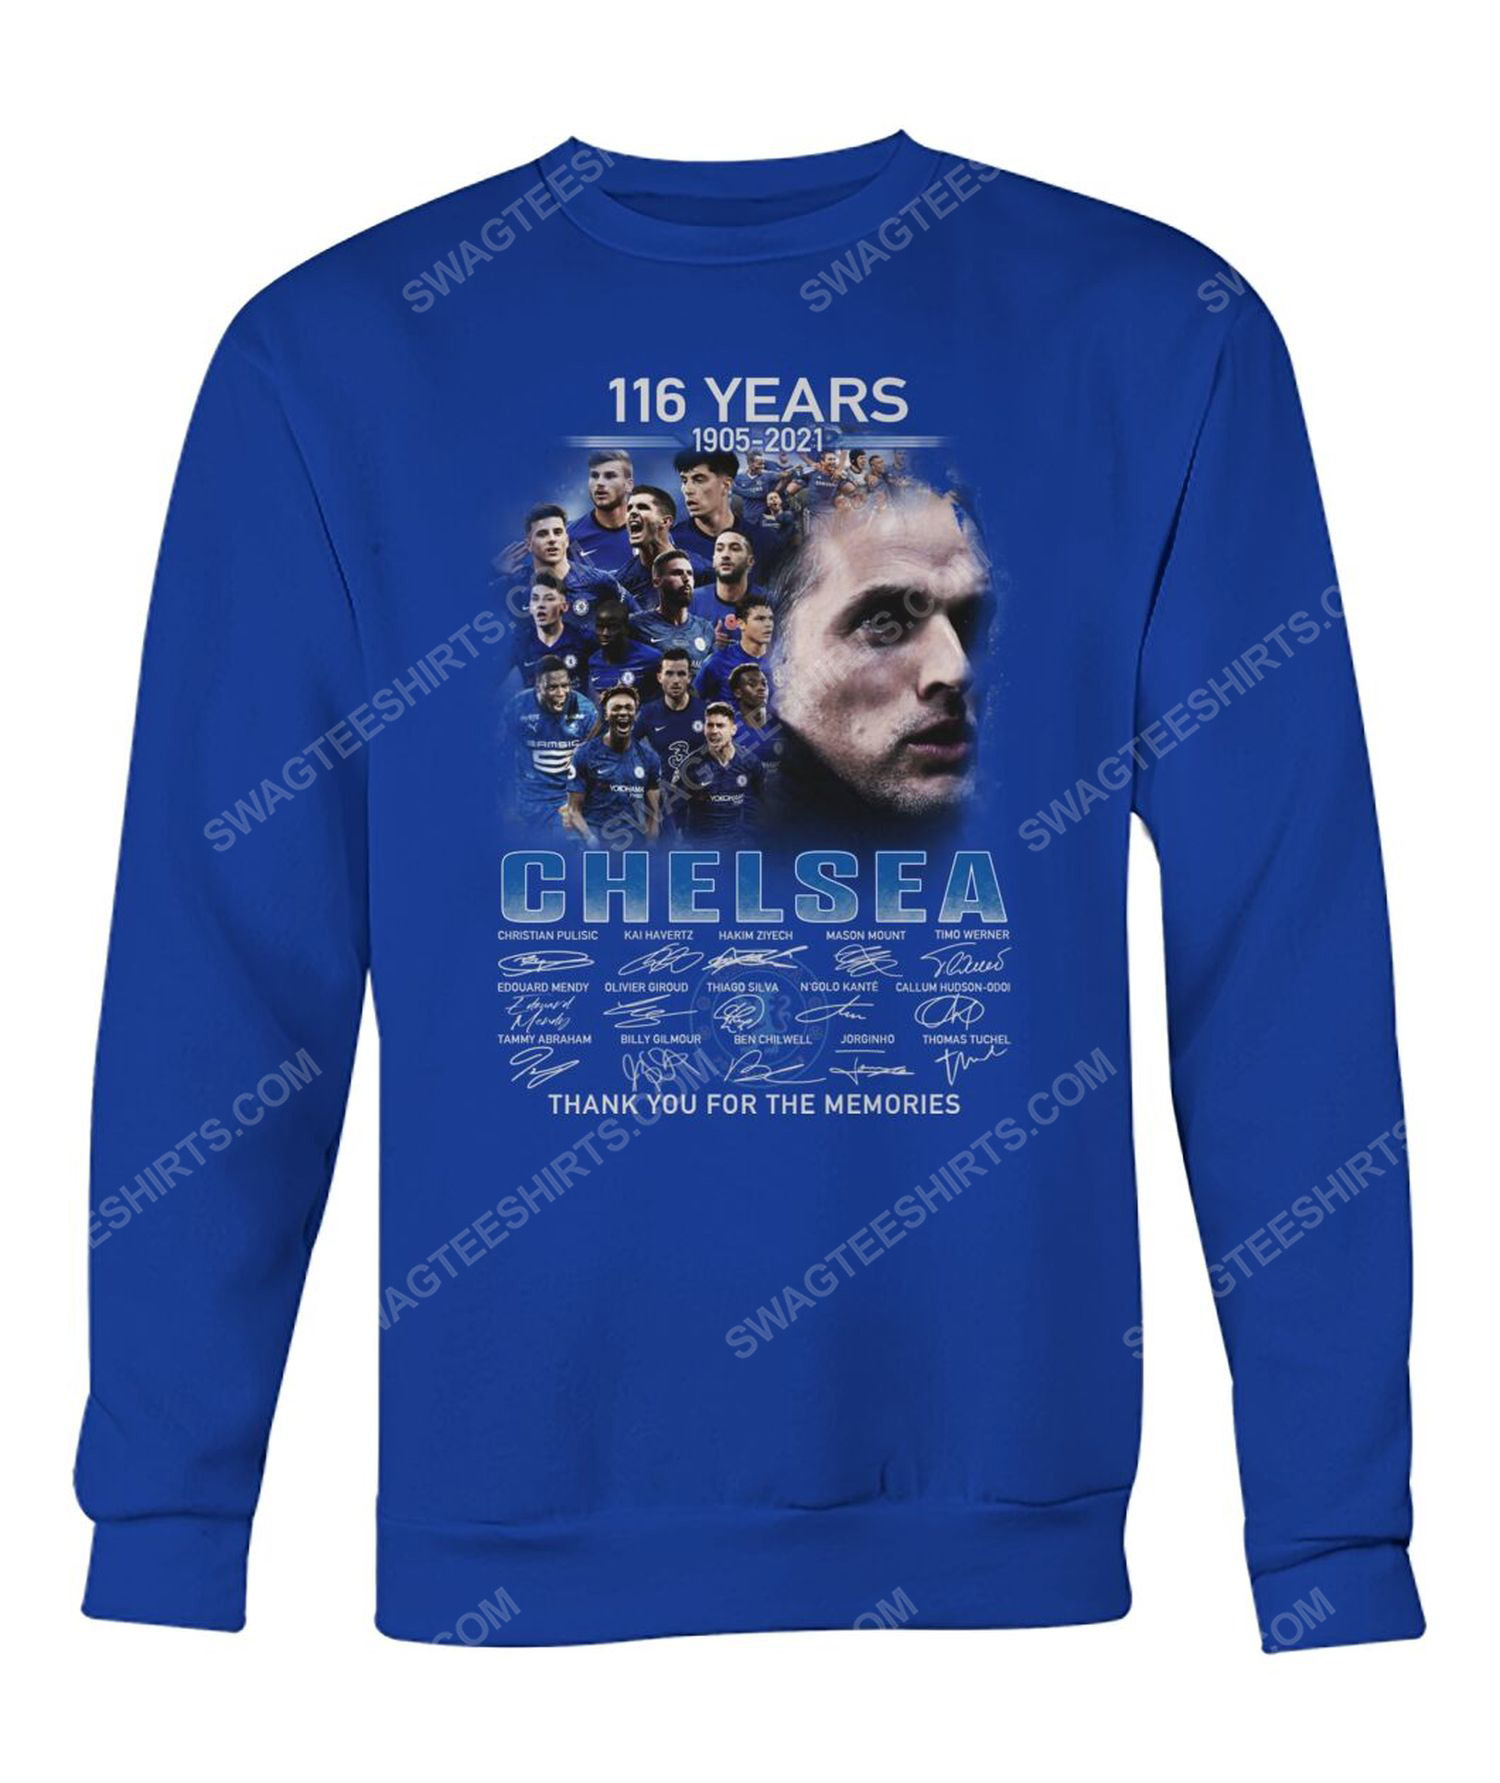 Chelsea fc thank you for the memories sweatshirt